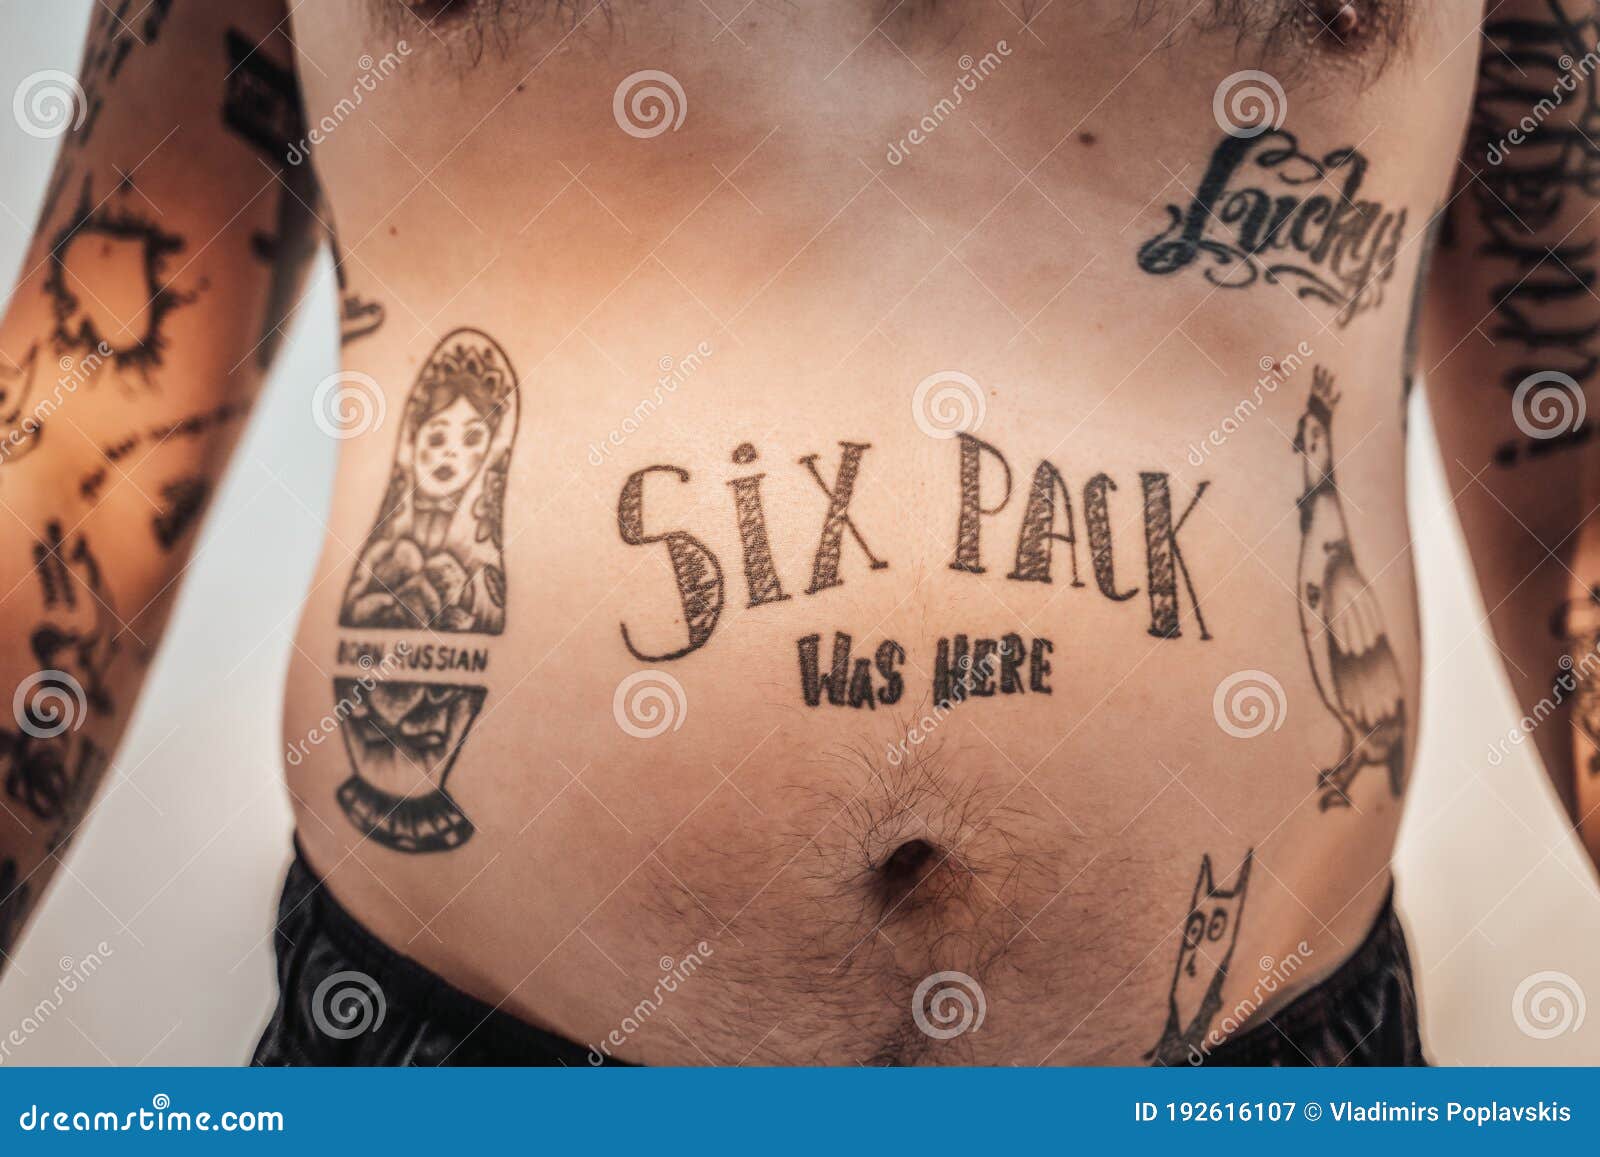 Aggregate 58 old english stomach tattoos  incdgdbentre